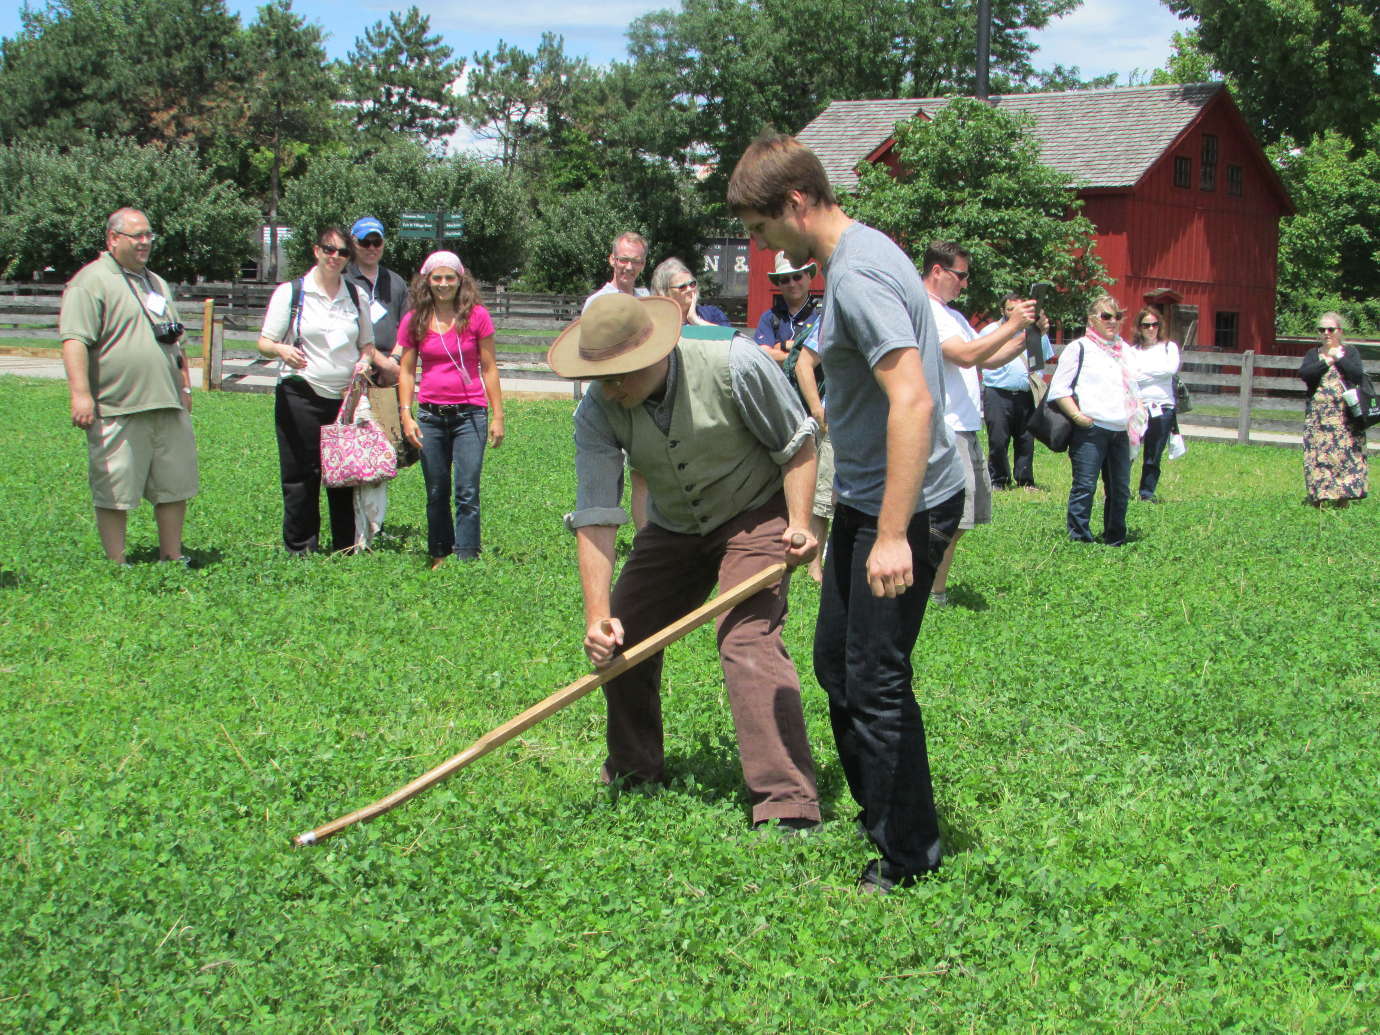 Teachers take turns using a scythe at The Henry Ford's working farm. Image courtesy of The Henry Ford.